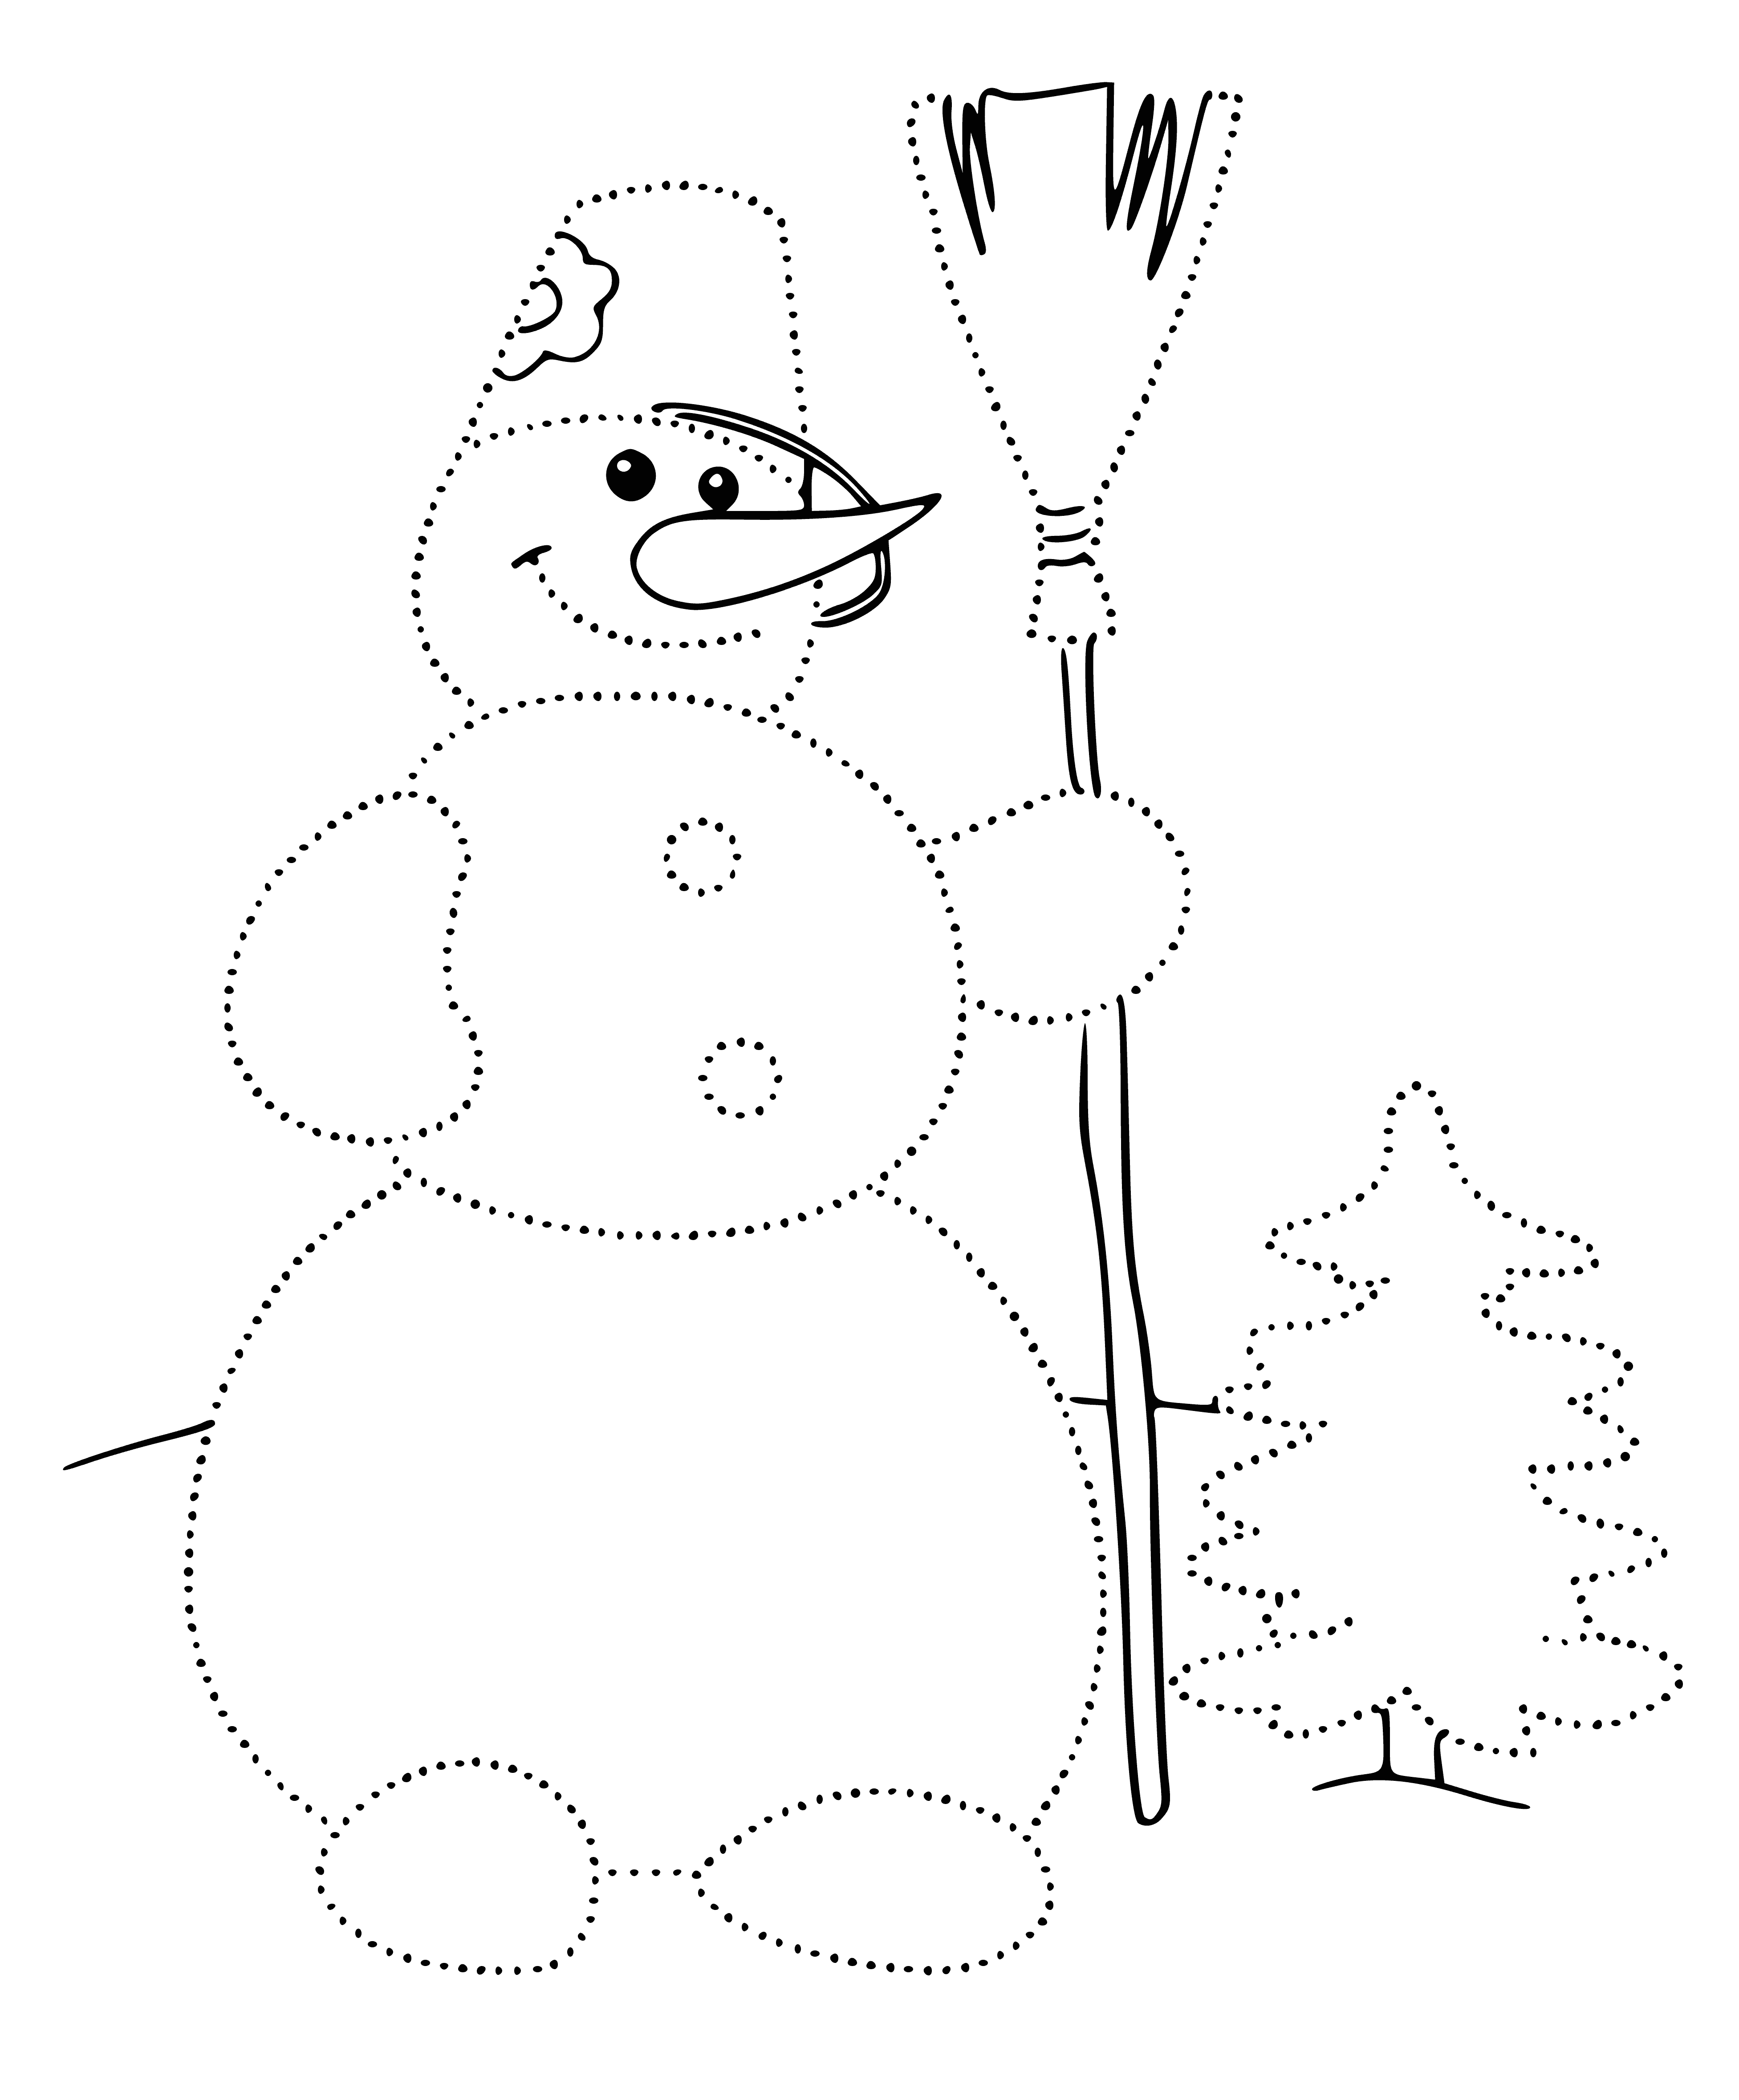 coloring page: A snowman with a top hat, scarf, two coal eyes, and a carrot nose stands in the snow.